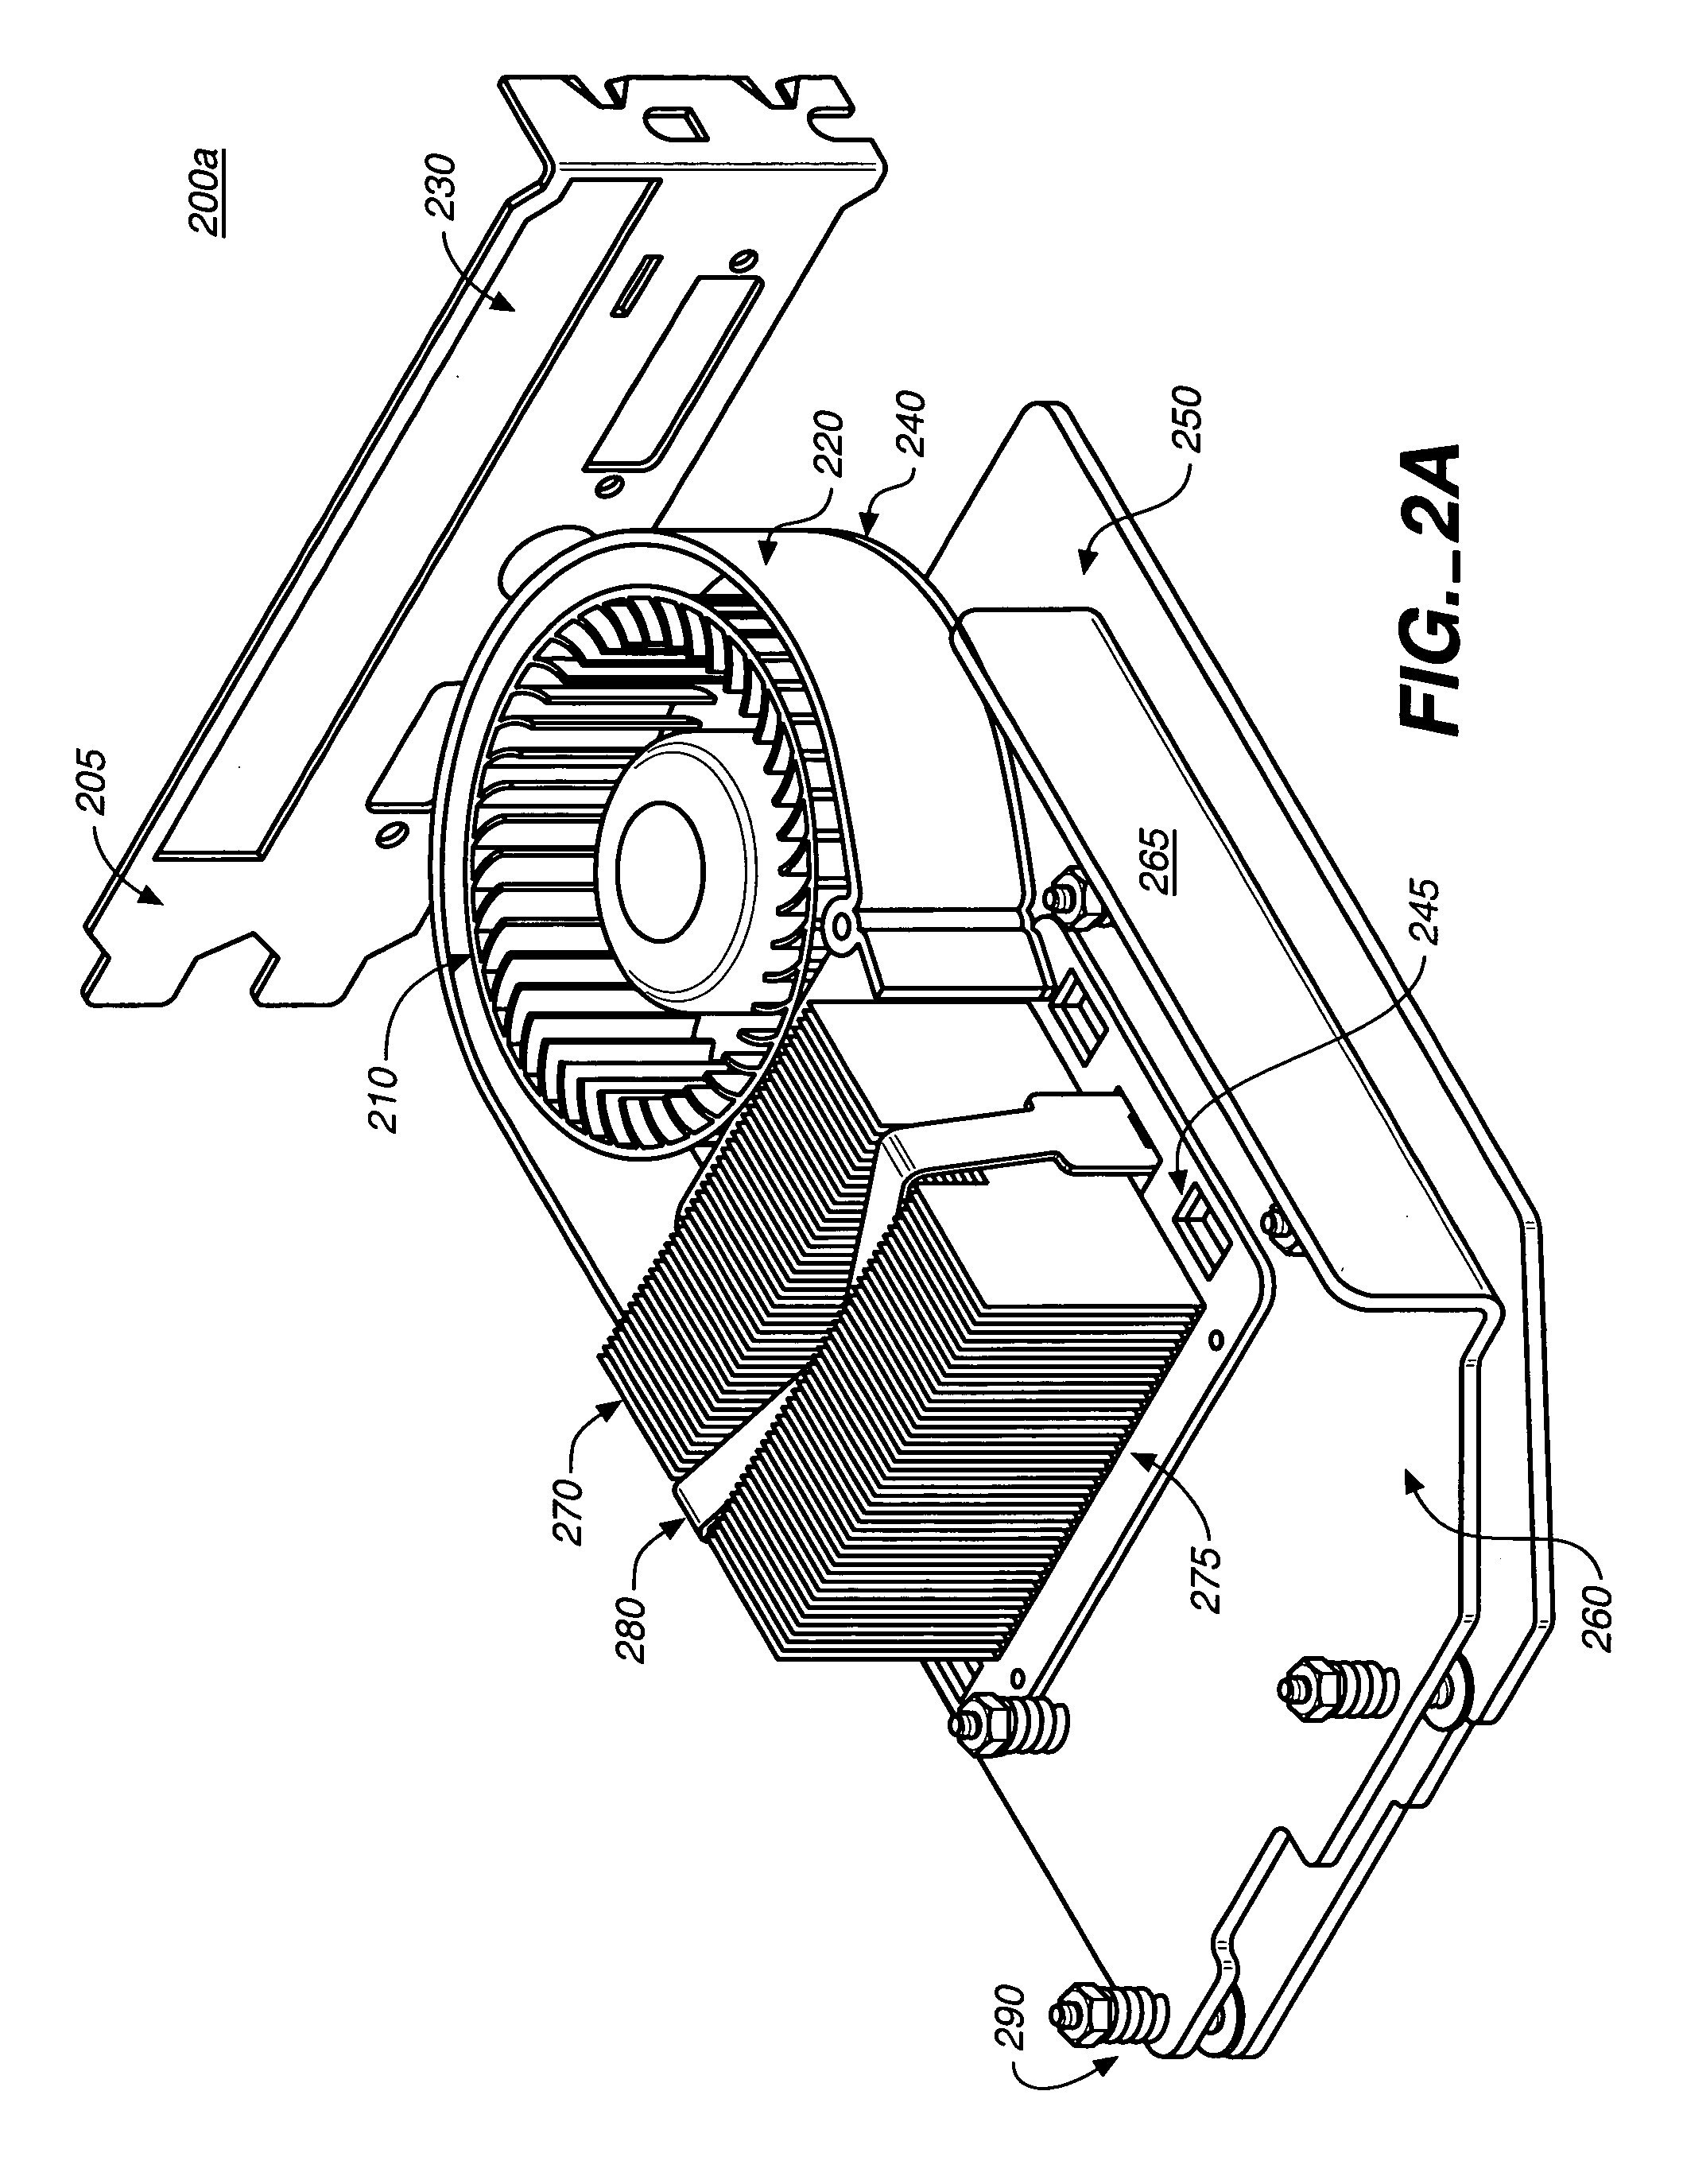 Noise-reducing blower structure